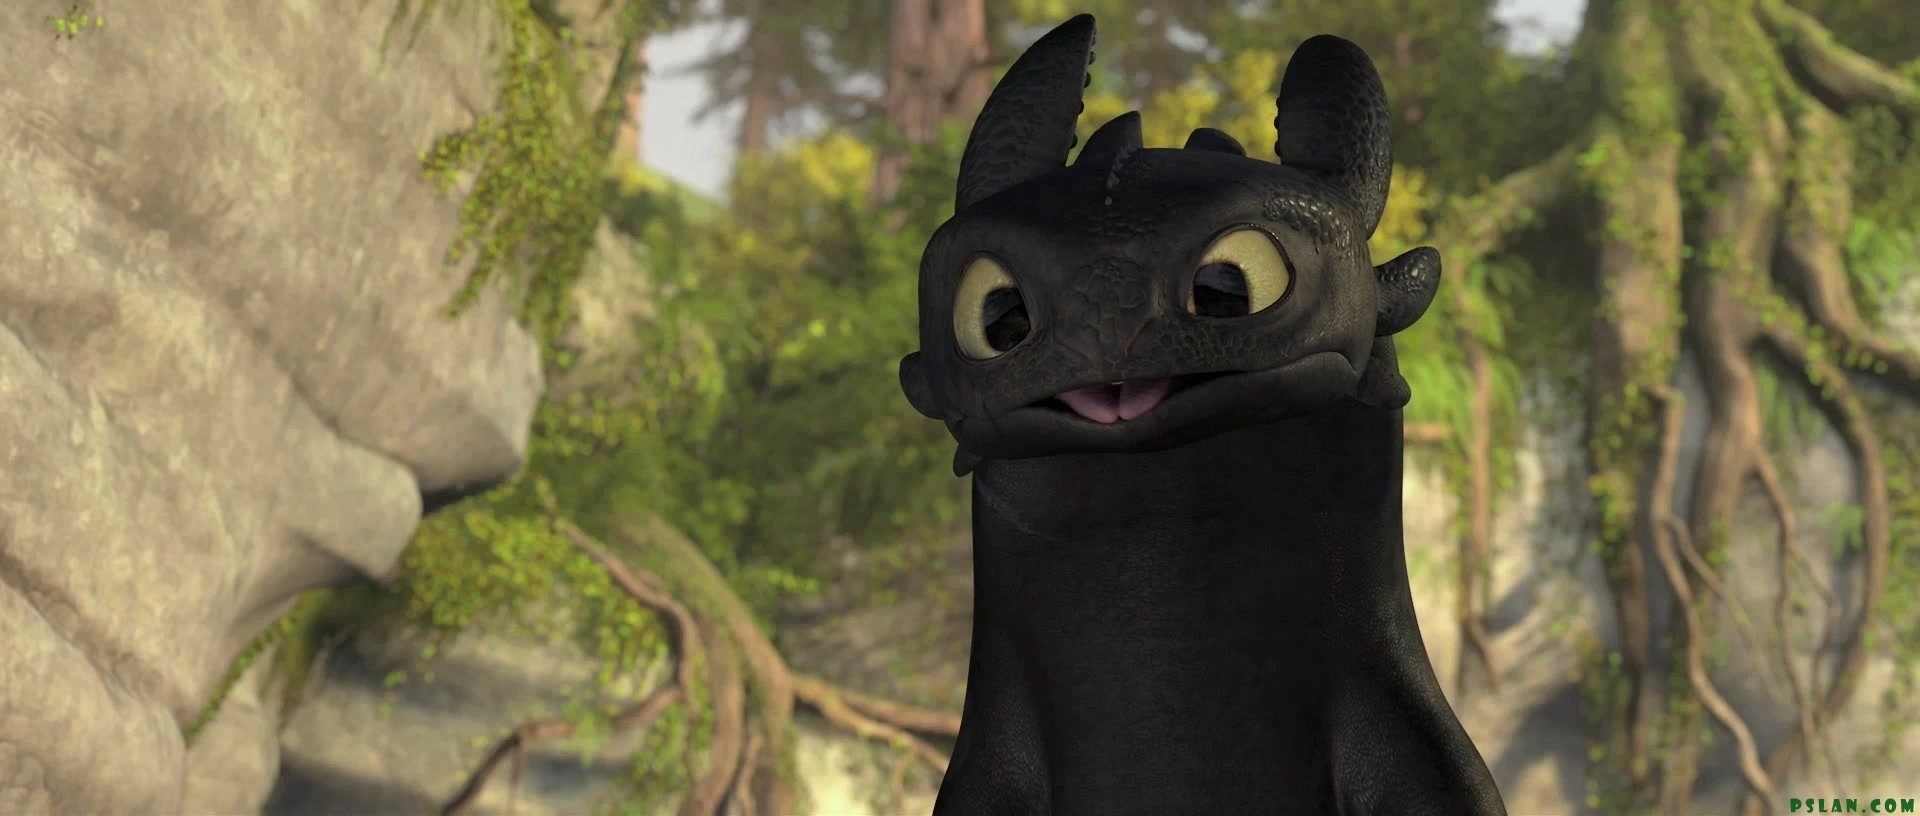 Toothless Pictures How To Train Your Dragon - Wallpaper HD Wide